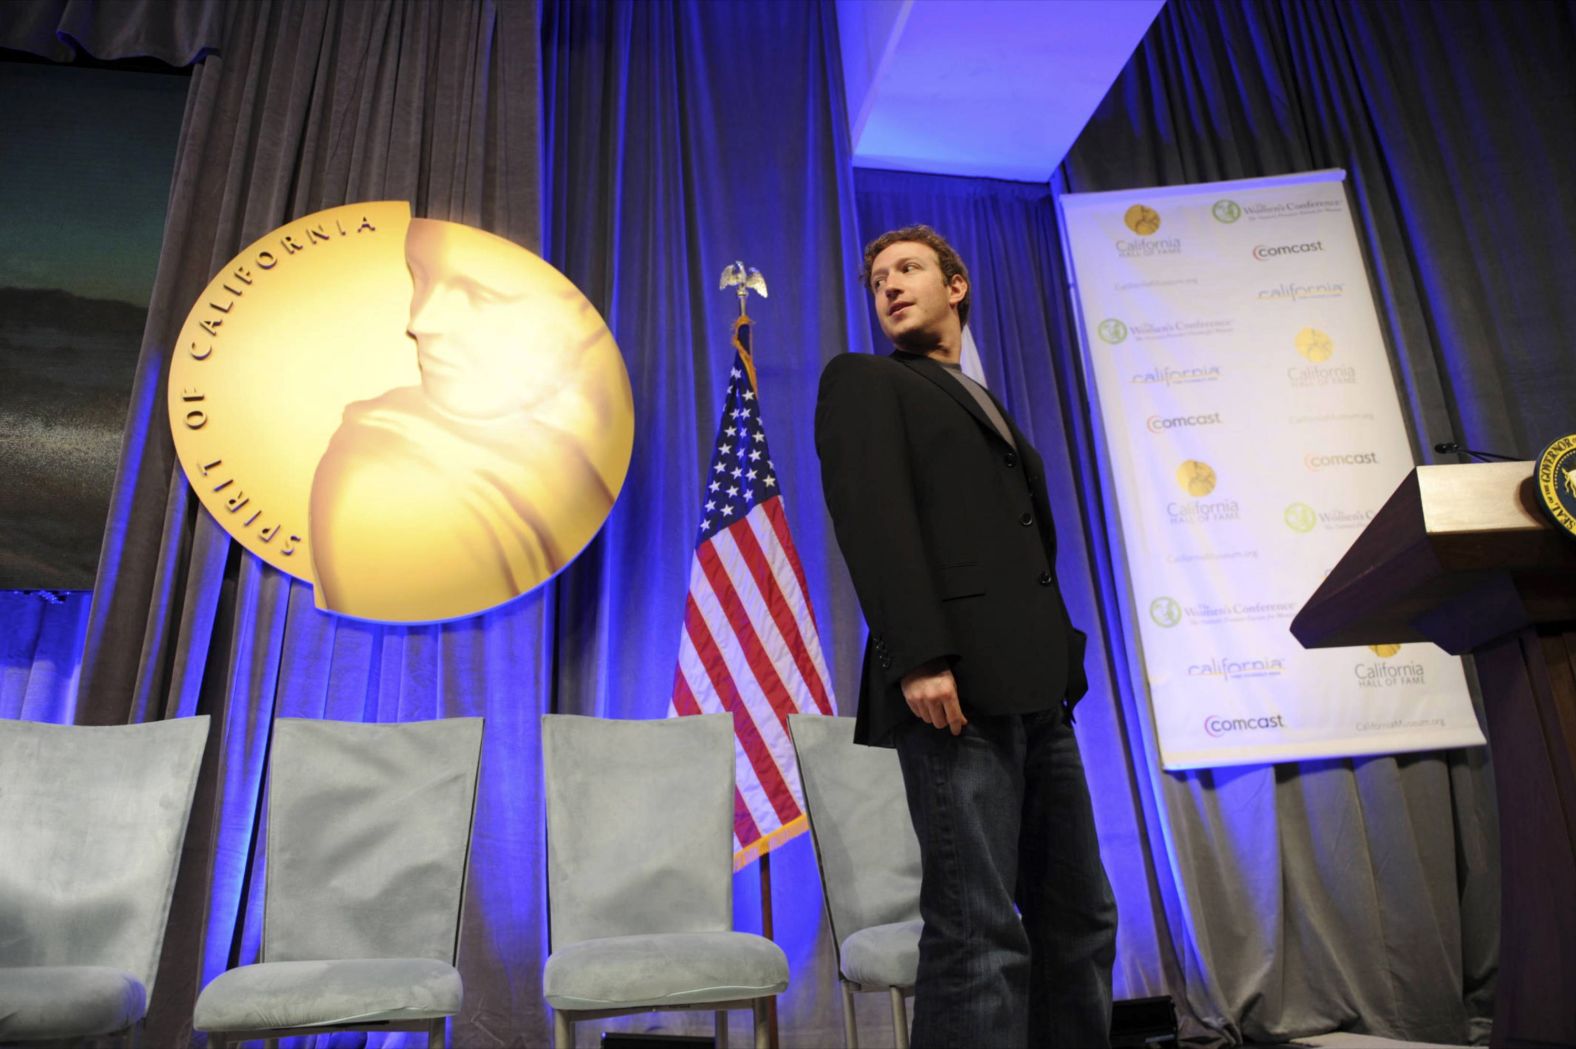 Zuckerberg walks on stage during his induction ceremony for the California Hall of Fame in December 2010. That month, he also signed the Giving Pledge, a public pledge to give away the majority of his wealth to philanthropic causes.